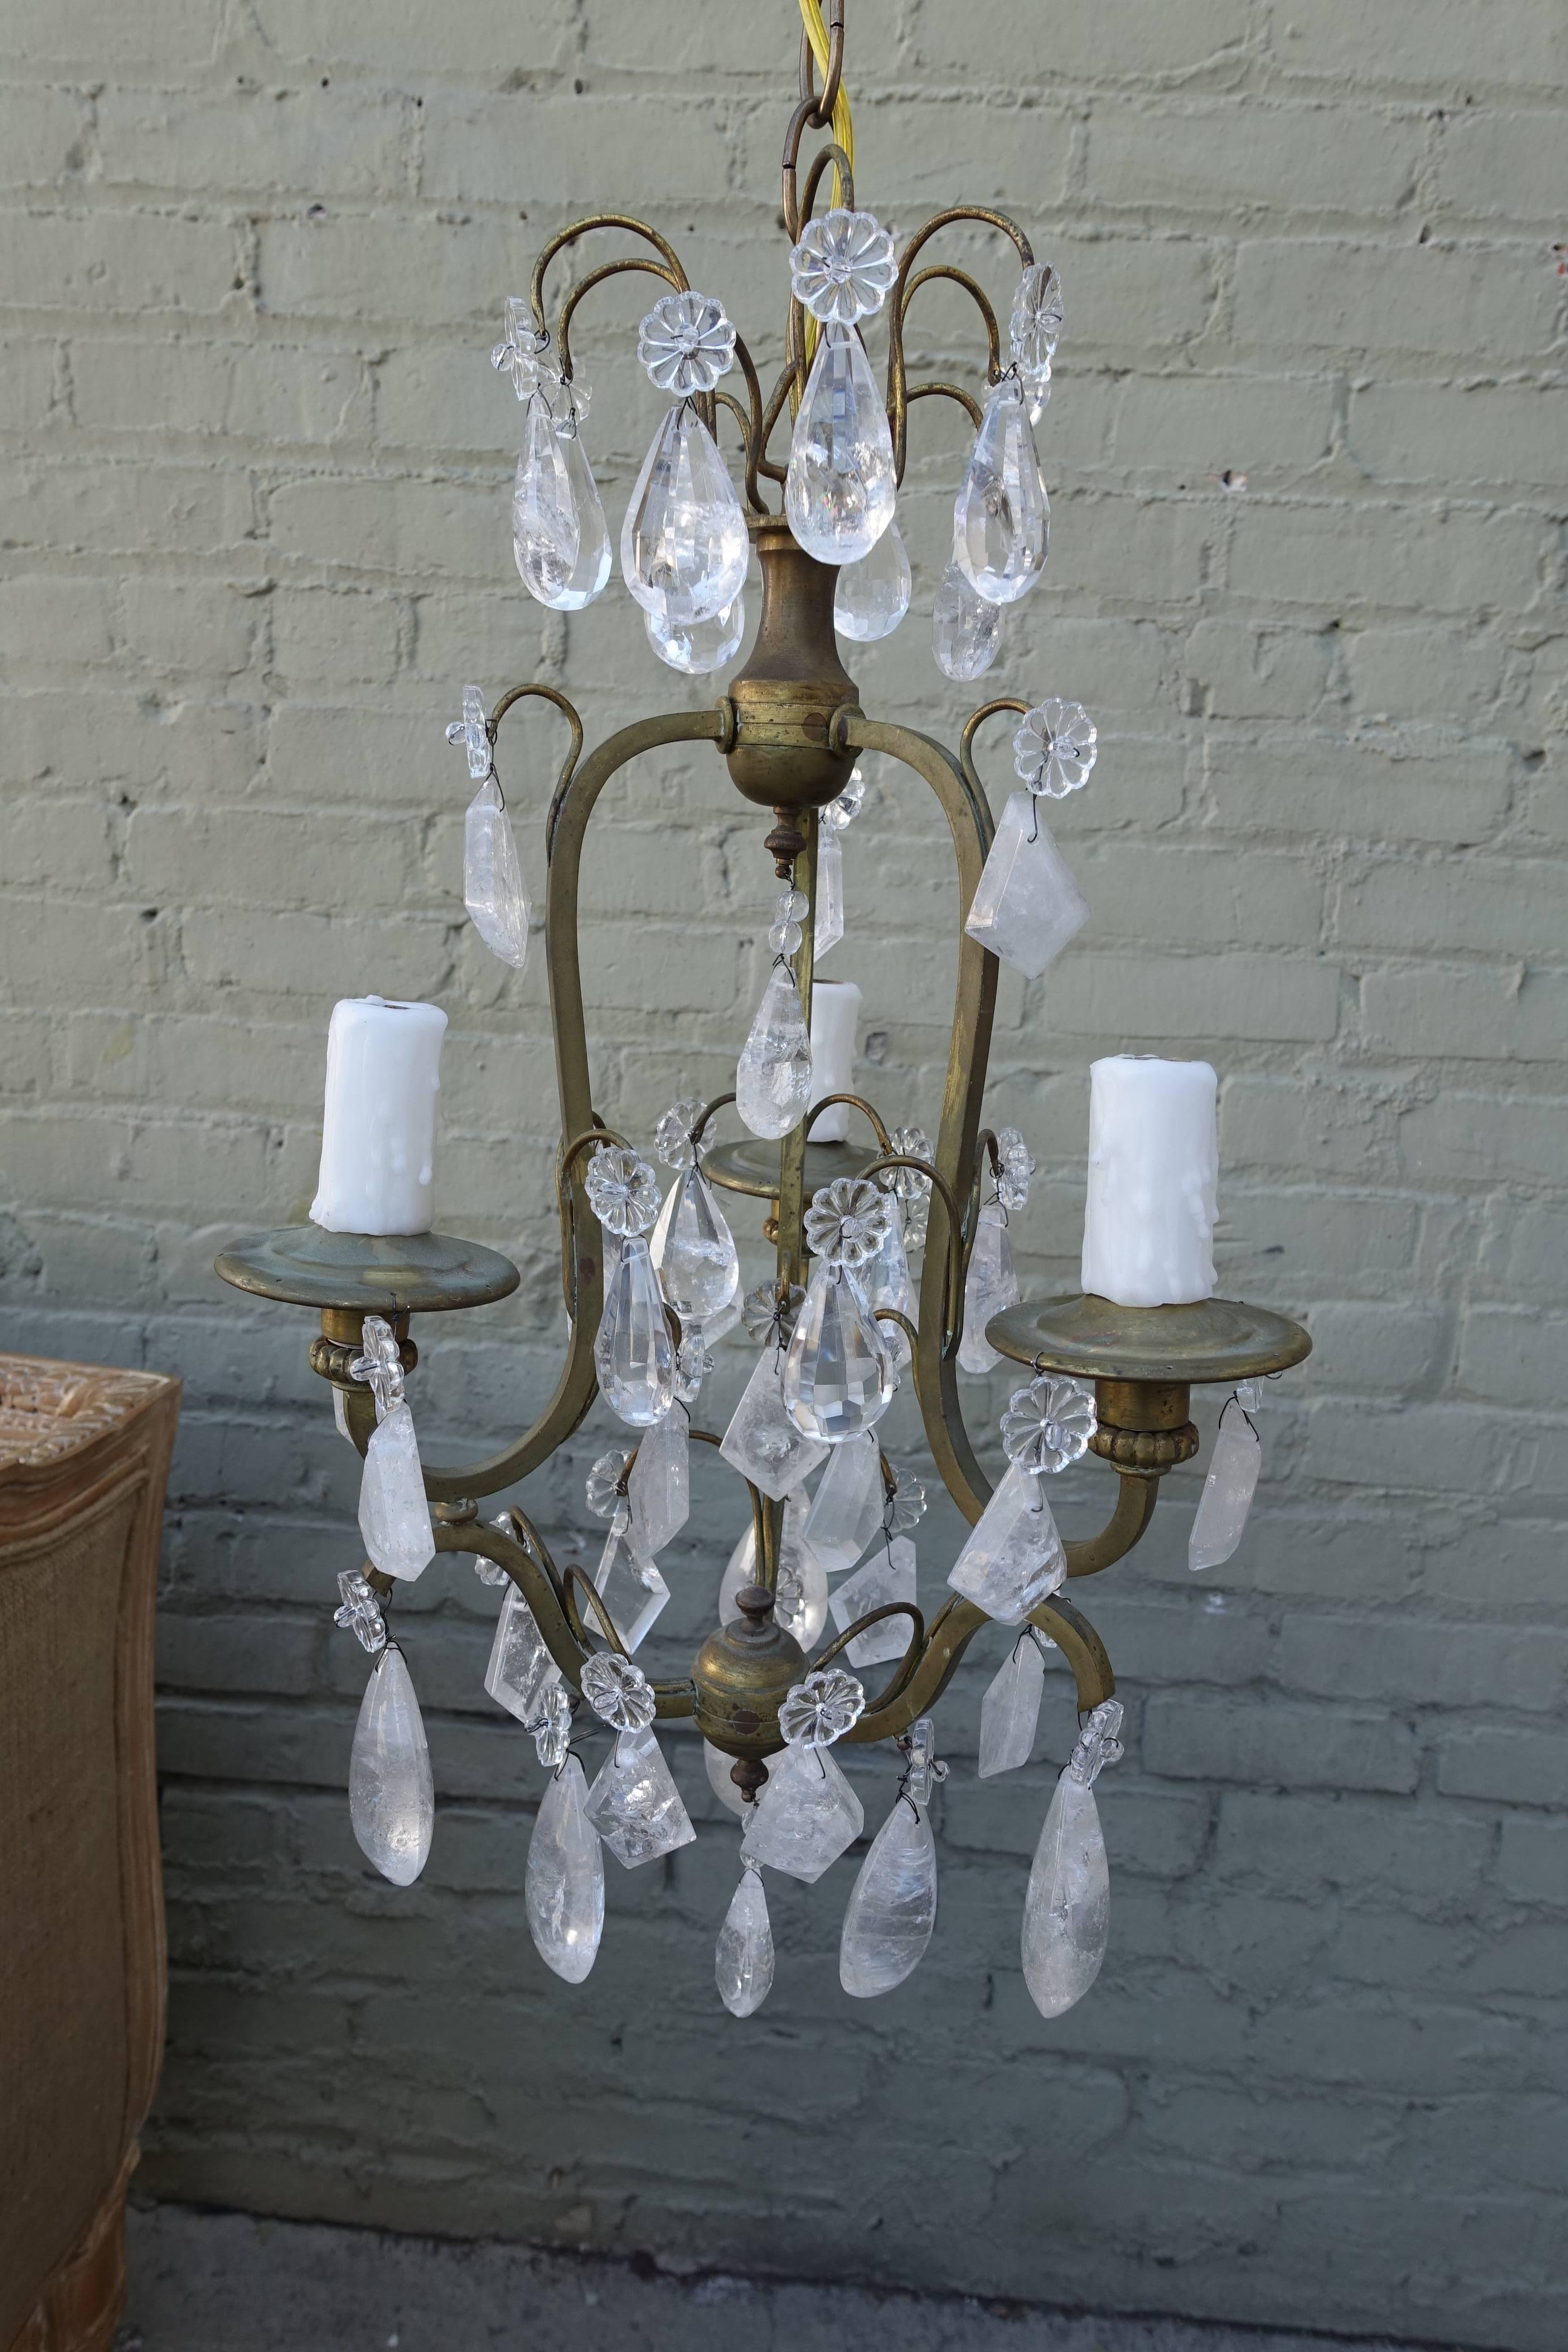 French three-light bronze chandelier adorned with almond and kite shaped rock crystals. Newly wired with drip wax candle covers. Chain and canopy included.